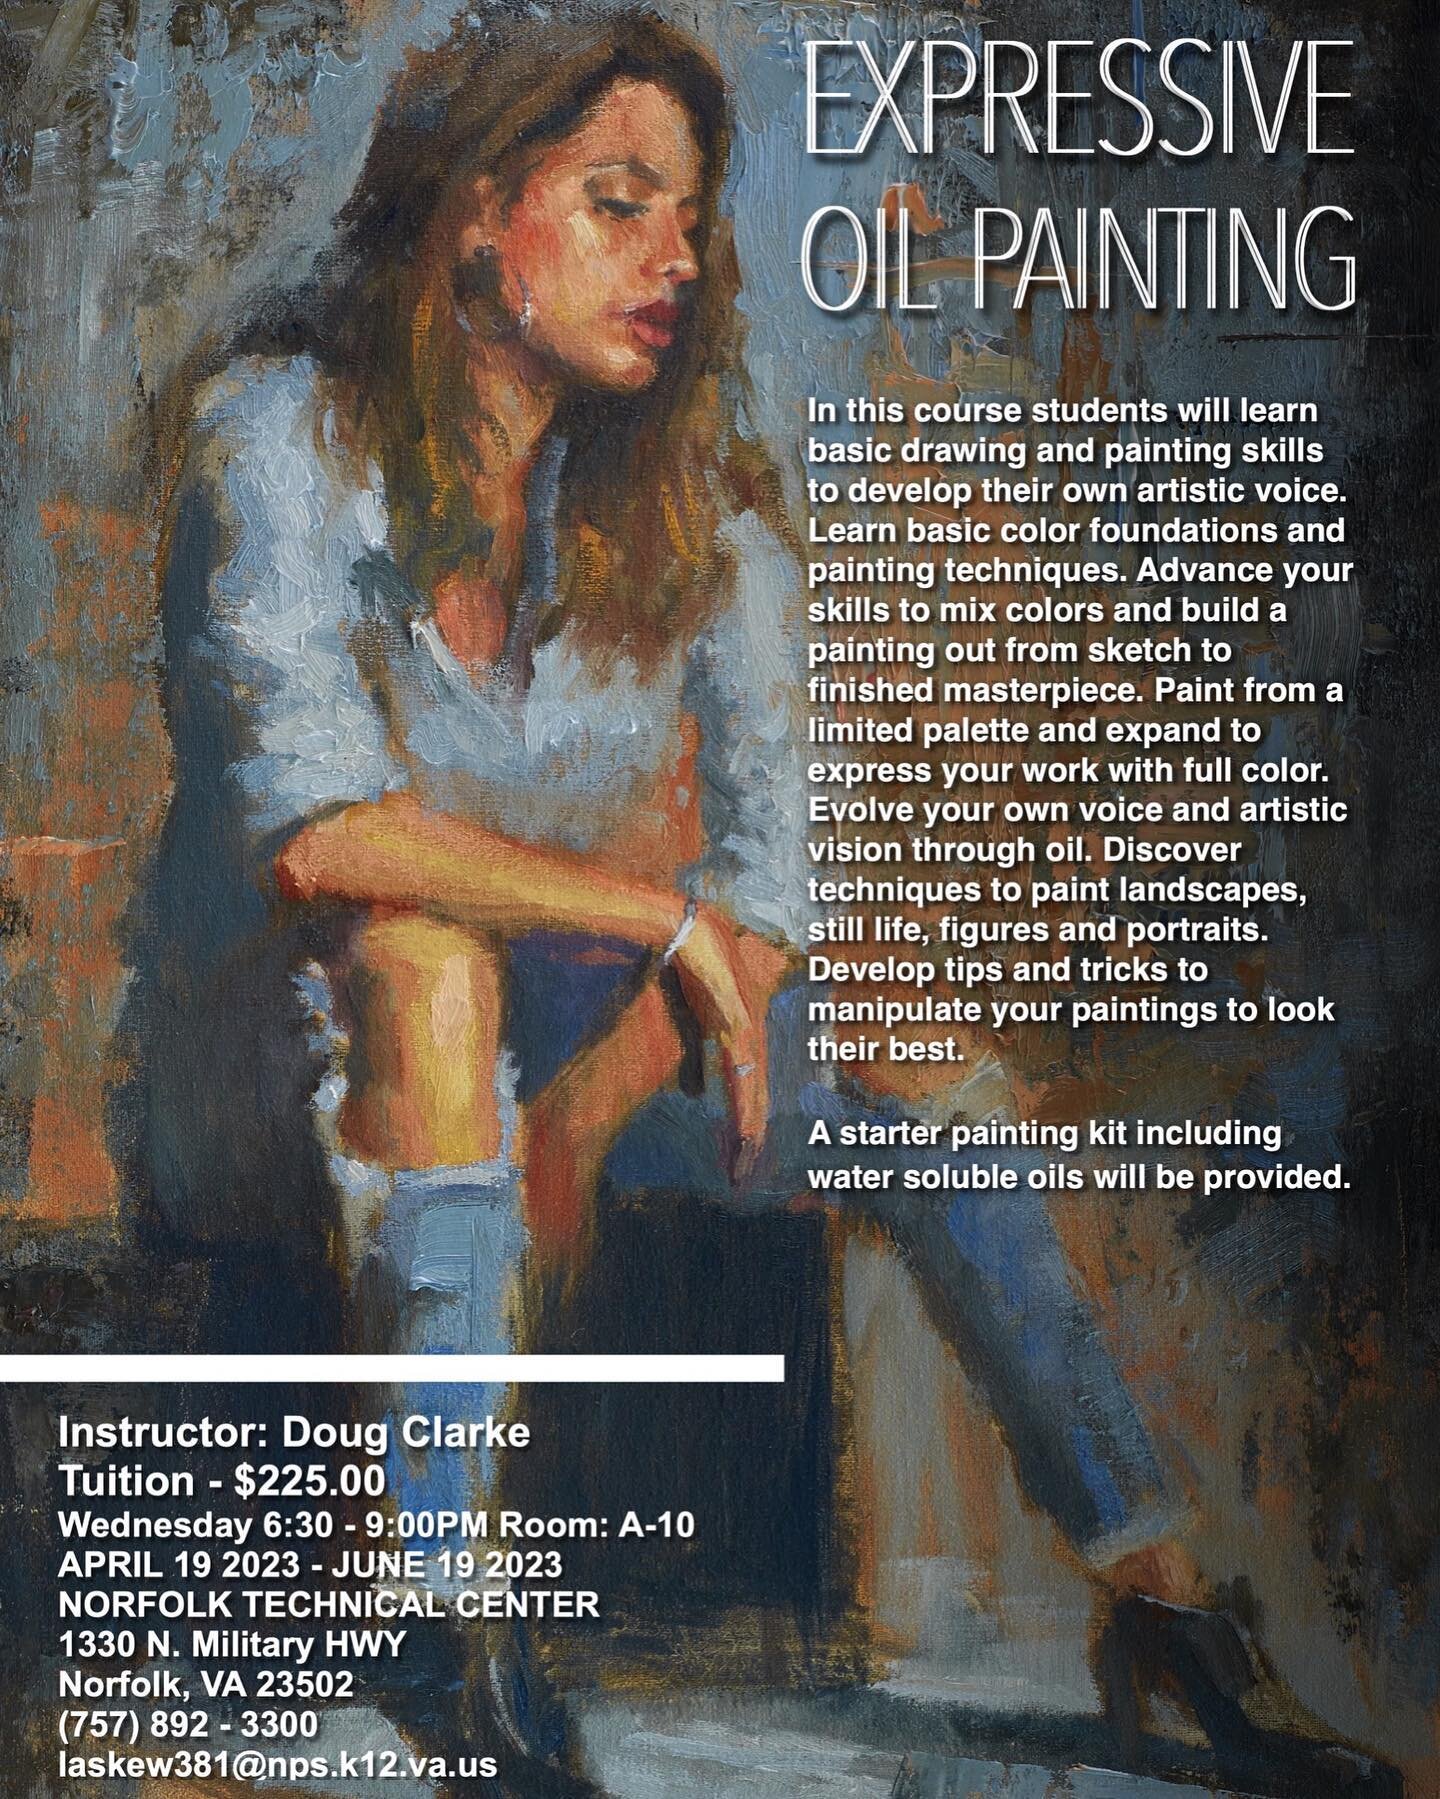 Still time left to sign up for my Expressive Painting Oil class in Norfolk VA! #oilpaintingclass #intstructionalpainting #paintinglesson